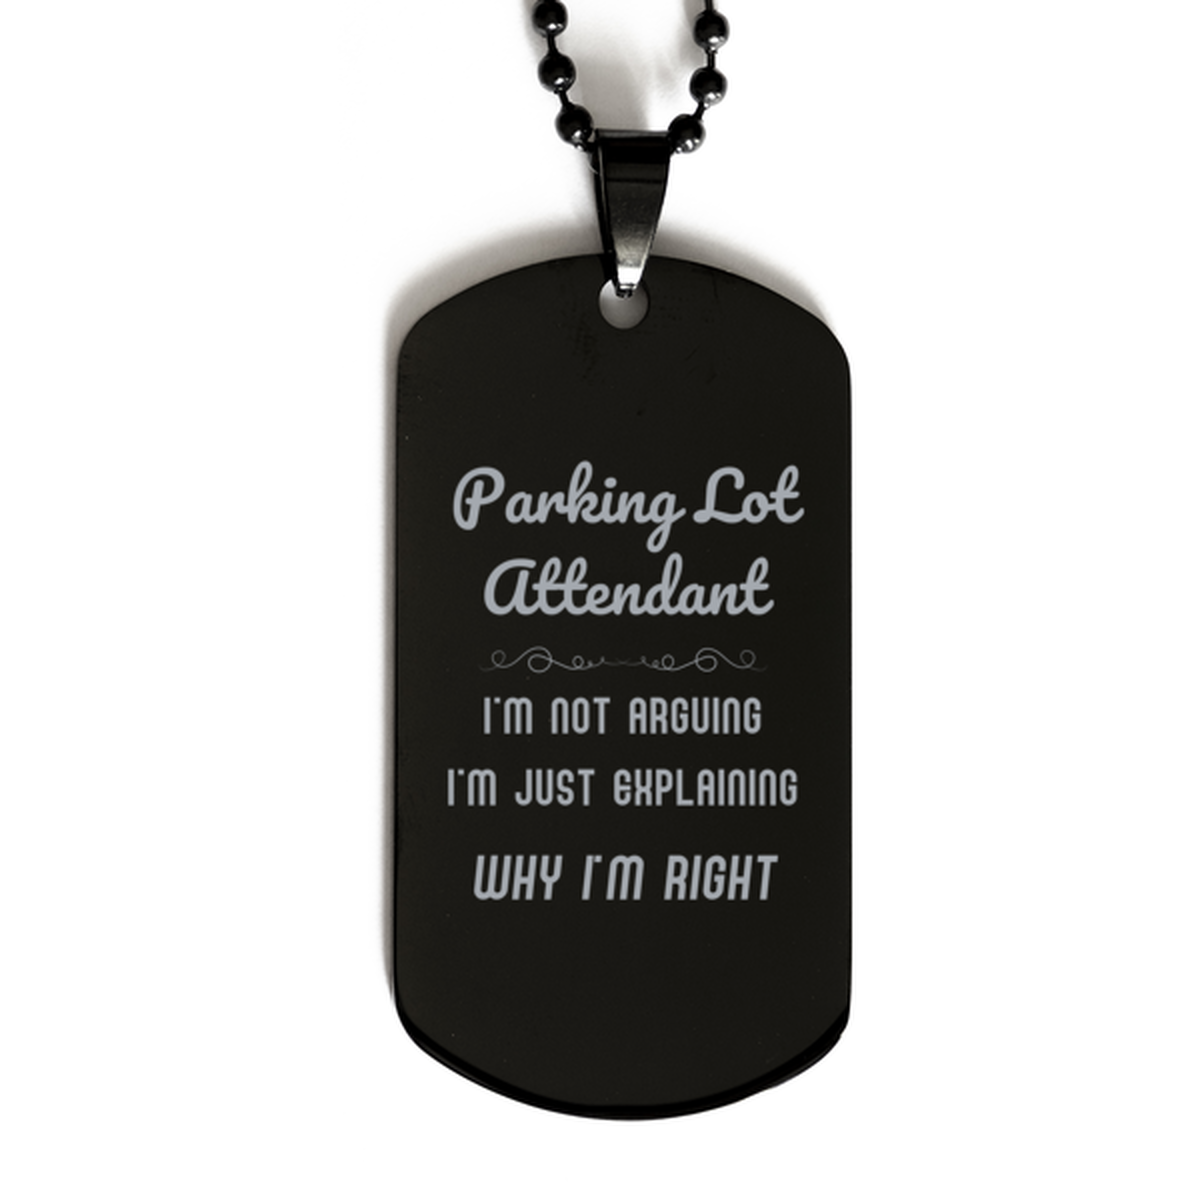 Parking Lot Attendant I'm not Arguing. I'm Just Explaining Why I'm RIGHT Black Dog Tag, Funny Saying Quote Parking Lot Attendant Gifts For Parking Lot Attendant Graduation Birthday Christmas Gifts for Men Women Coworker